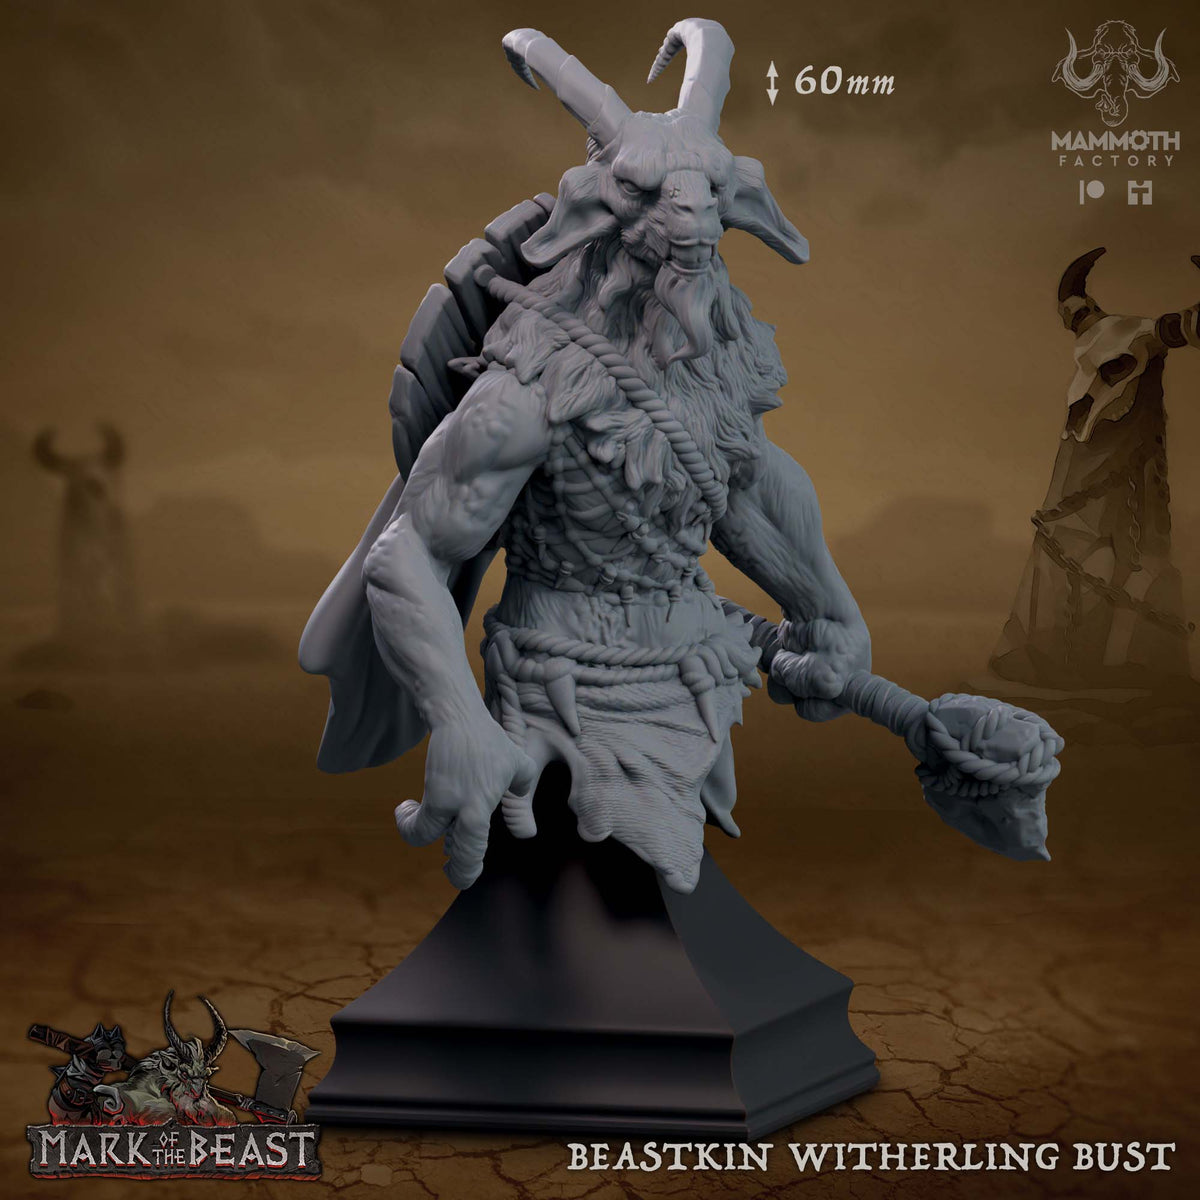 Beastkin Witherling Bust